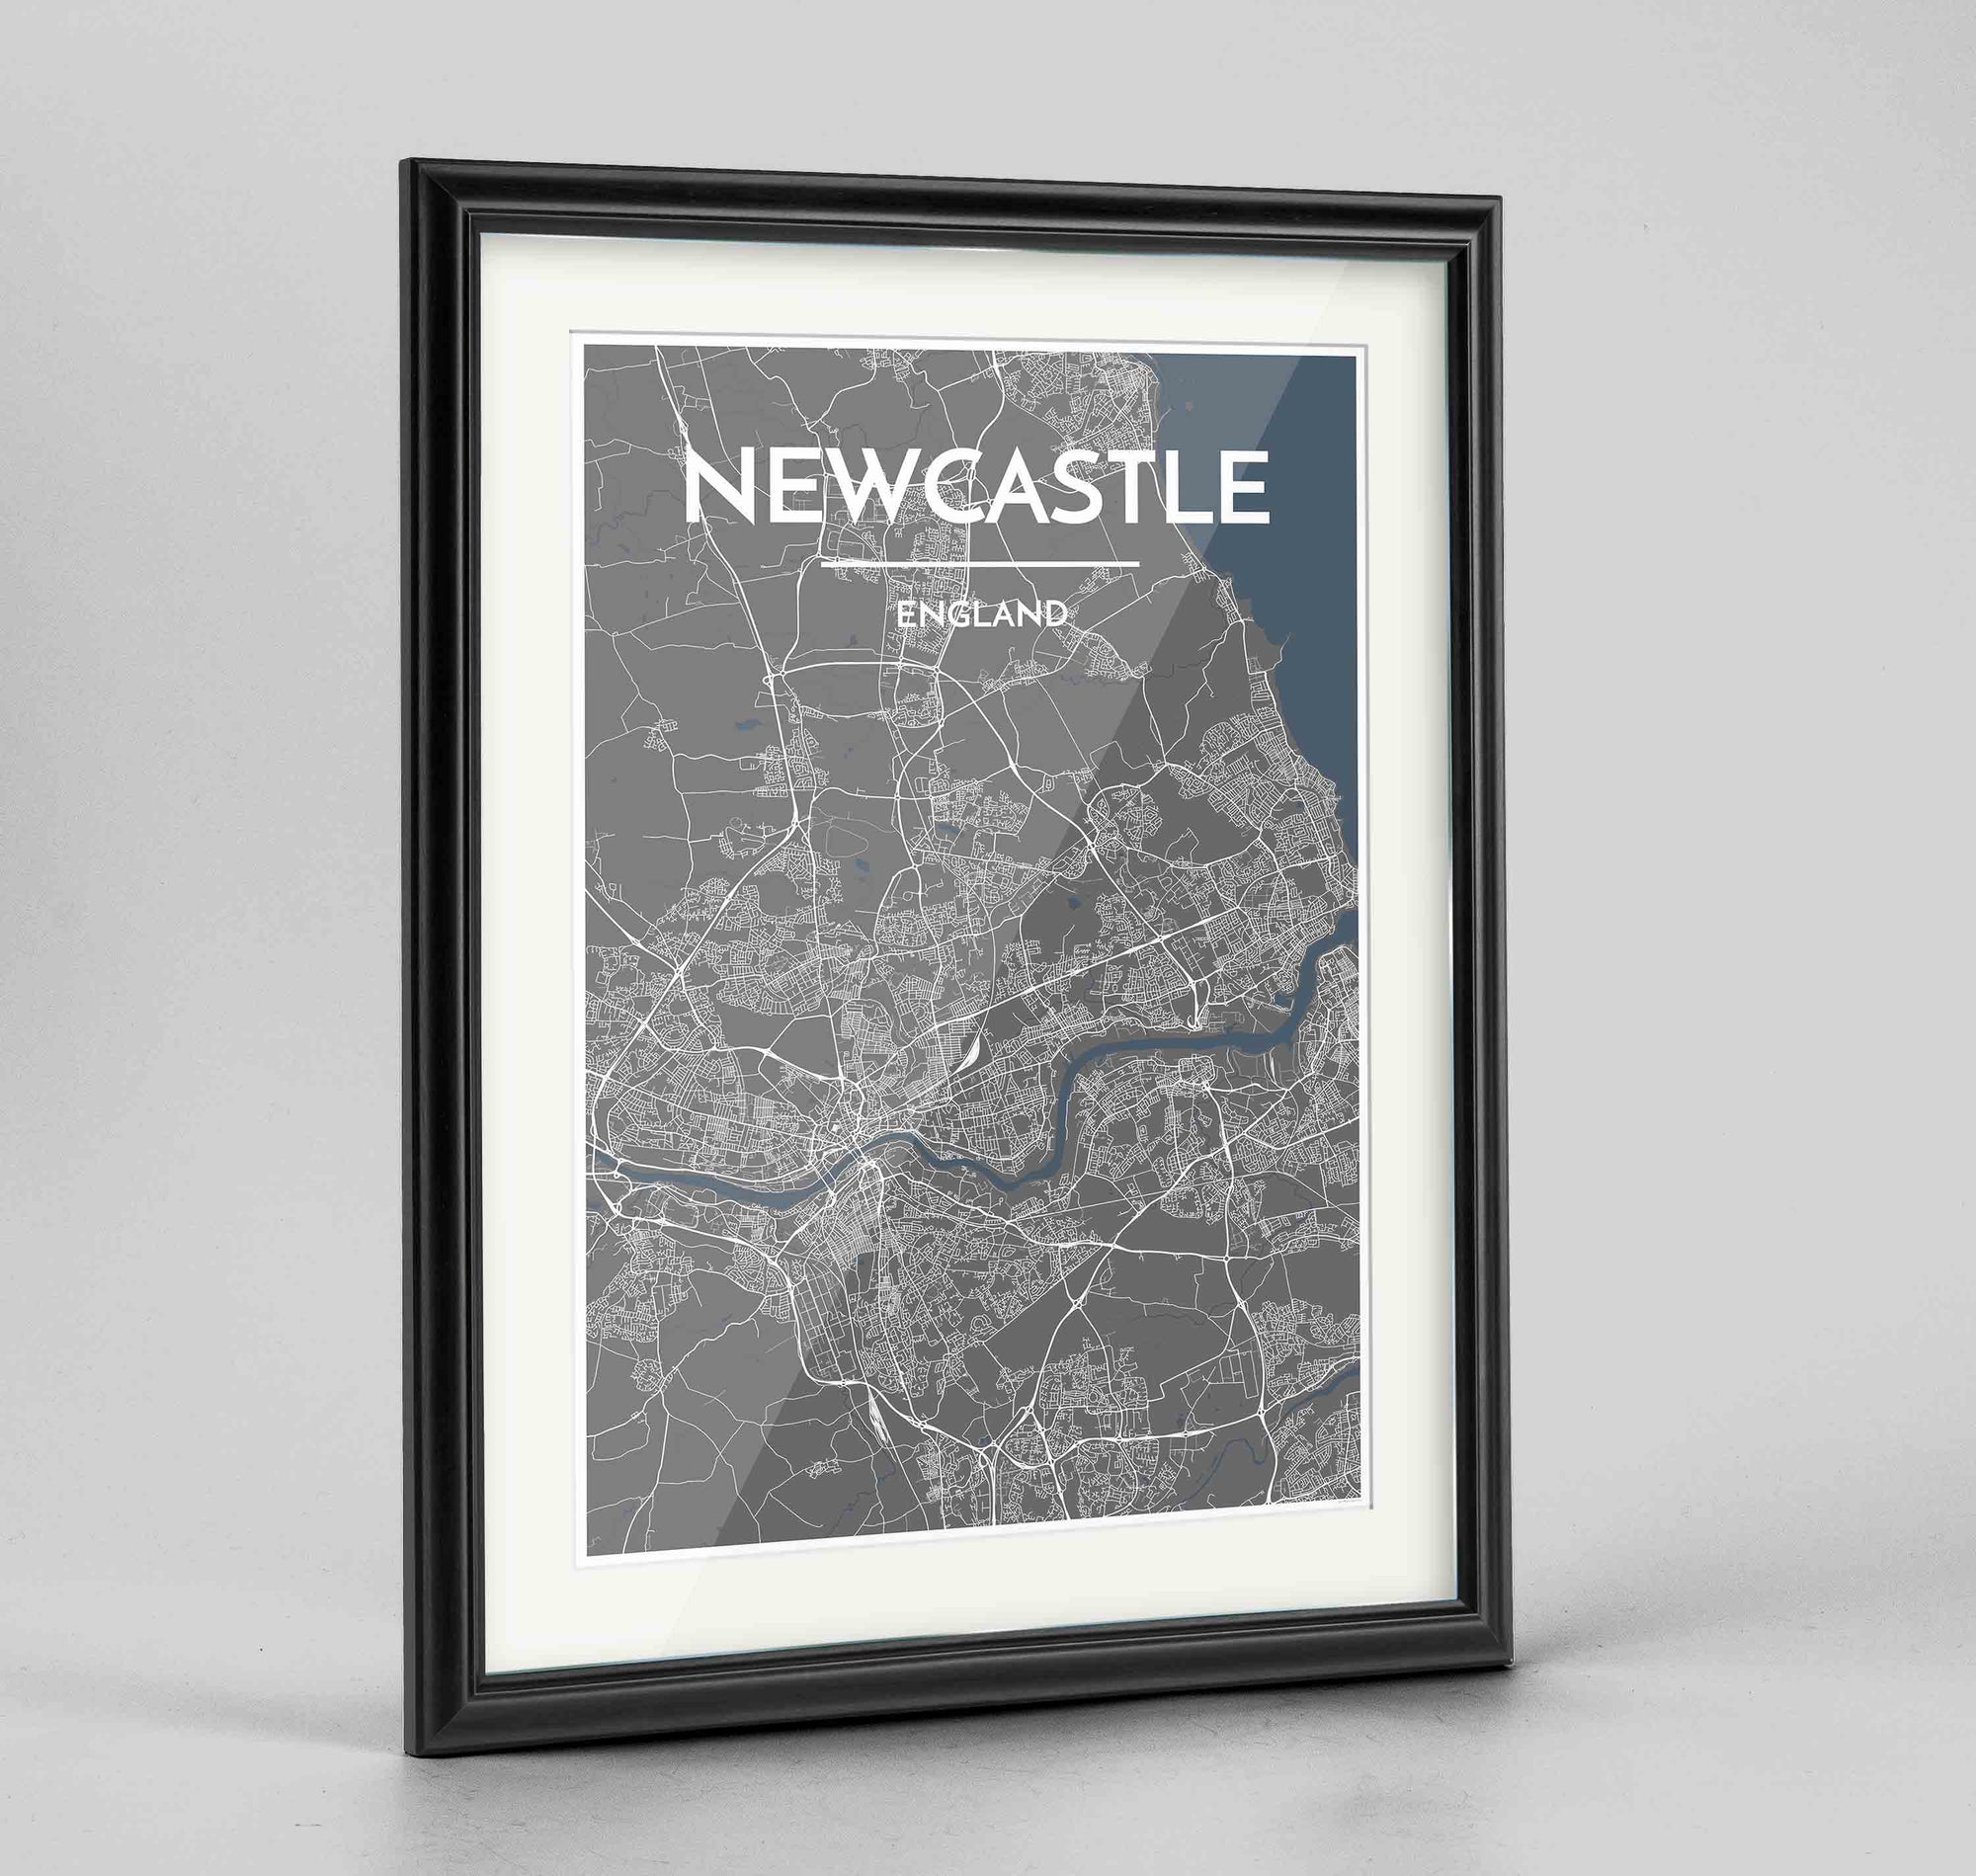 Framed Newcastle Map Art Print 24x36" Traditional Black frame Point Two Design Group